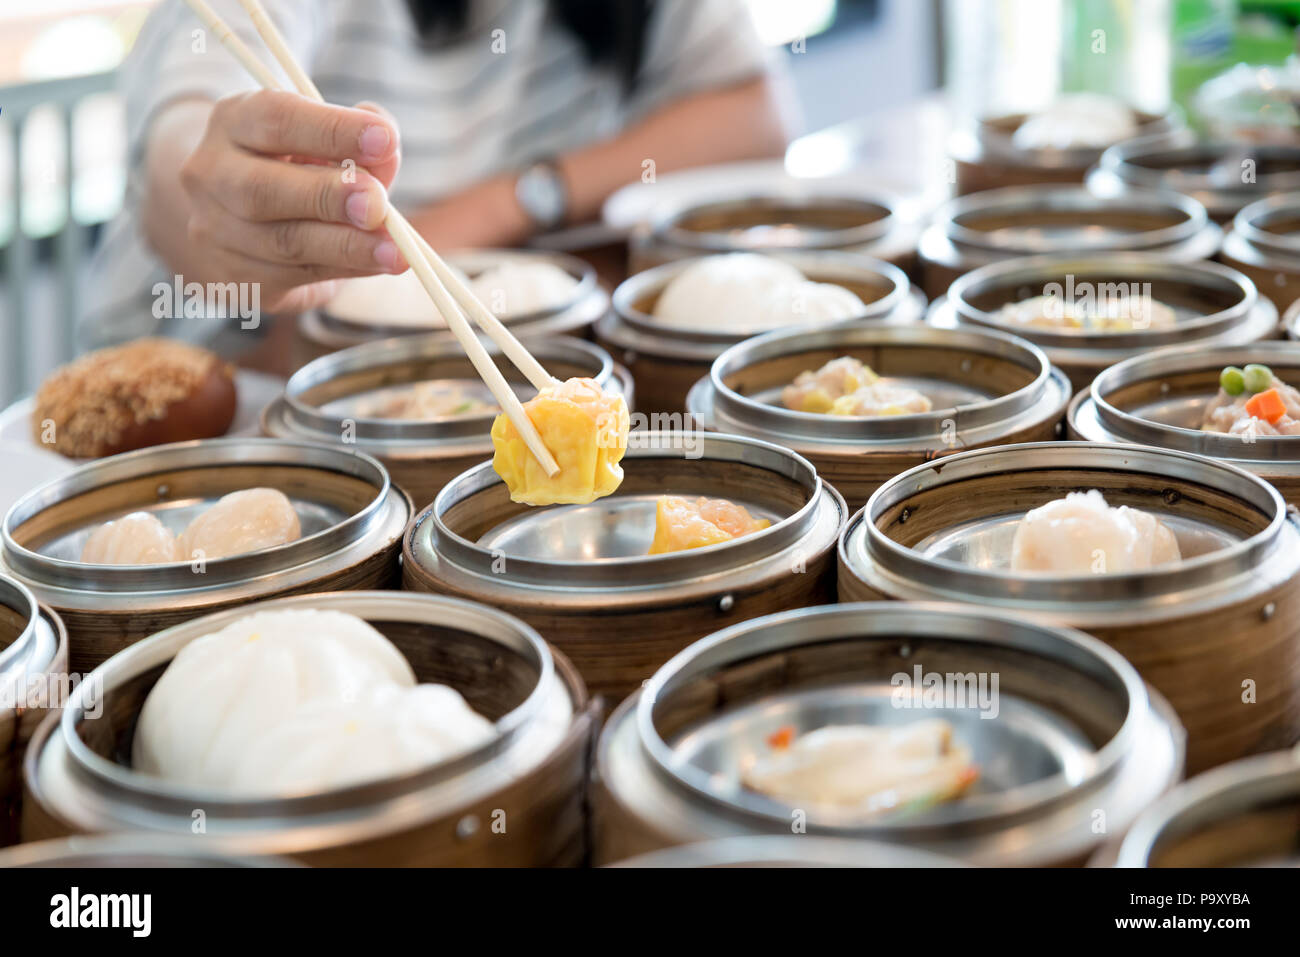 Chinese streamed dumpling in bamboo basket on table in Chinese restaurant. Stock Photo